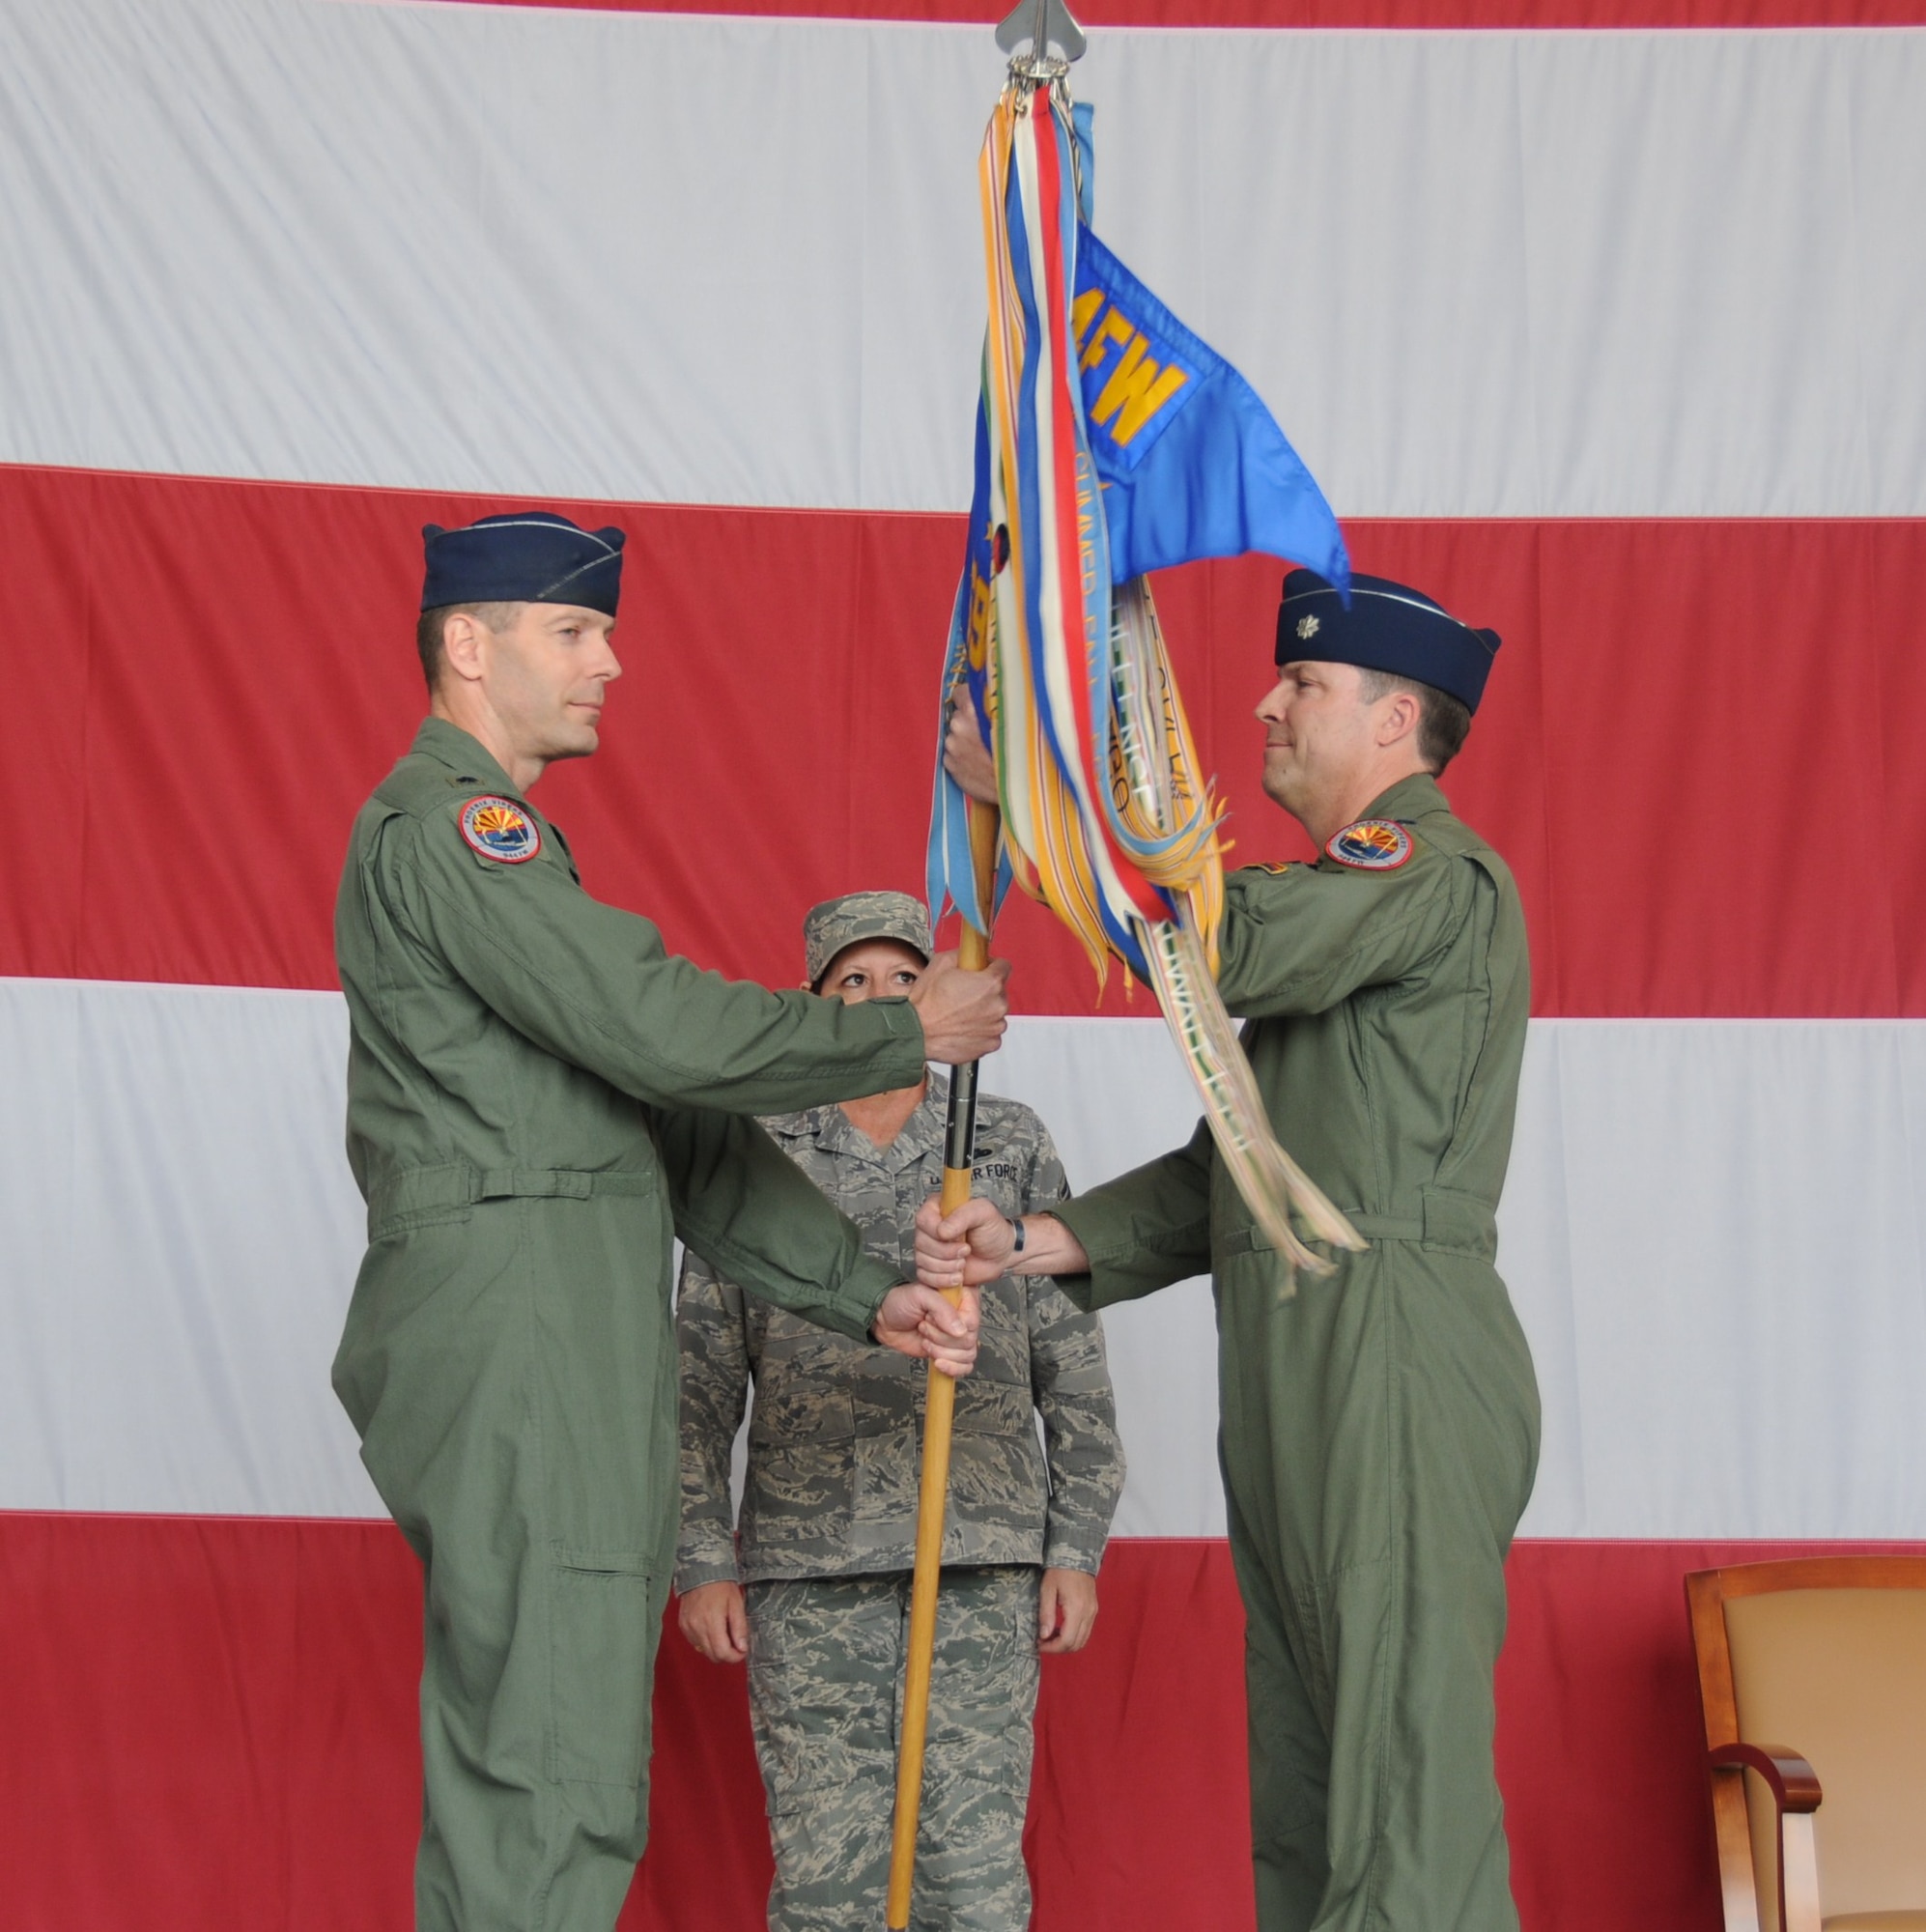 Lt. Col. David Garfield, 944th Operations Group commander, passes the 69th
Fighter Squadron guidon to Lt. Col. Steve Speckhard, 69th FS commander,
during the squadron's activation ceremony March 6 where the pilots of the
301st Fighter Squadron symbolically changed their patch to the 69th FS. The
301st FS, which traces its roots to the Tuskegee Airmen of World War II,
will continue its legacy with the next generation aircraft, the F-22 Raptor,
at Holloman Air Force Base, N.M., as a Reserve associate unit. The 69th FS
pilots will continue their reserve associate pilot training program with the
56th Fighter Wing here at Luke. (U.S. Air Force photo/Tech. Sgt. Susan
Stout)
